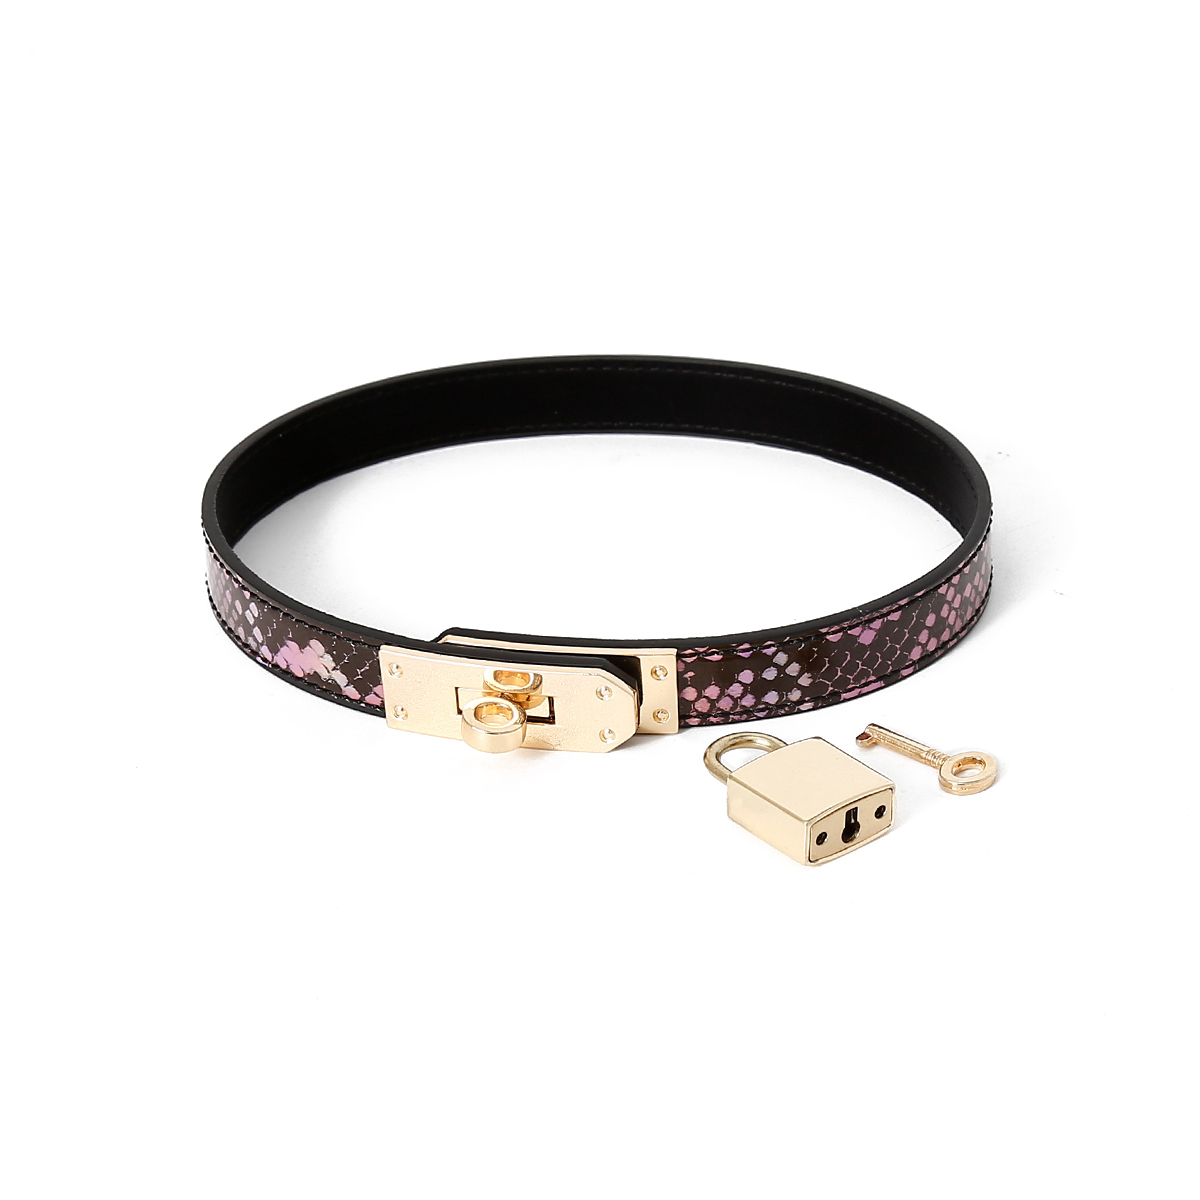 Collar/Bracelet One-size Narrow Gold/Pink Reptile